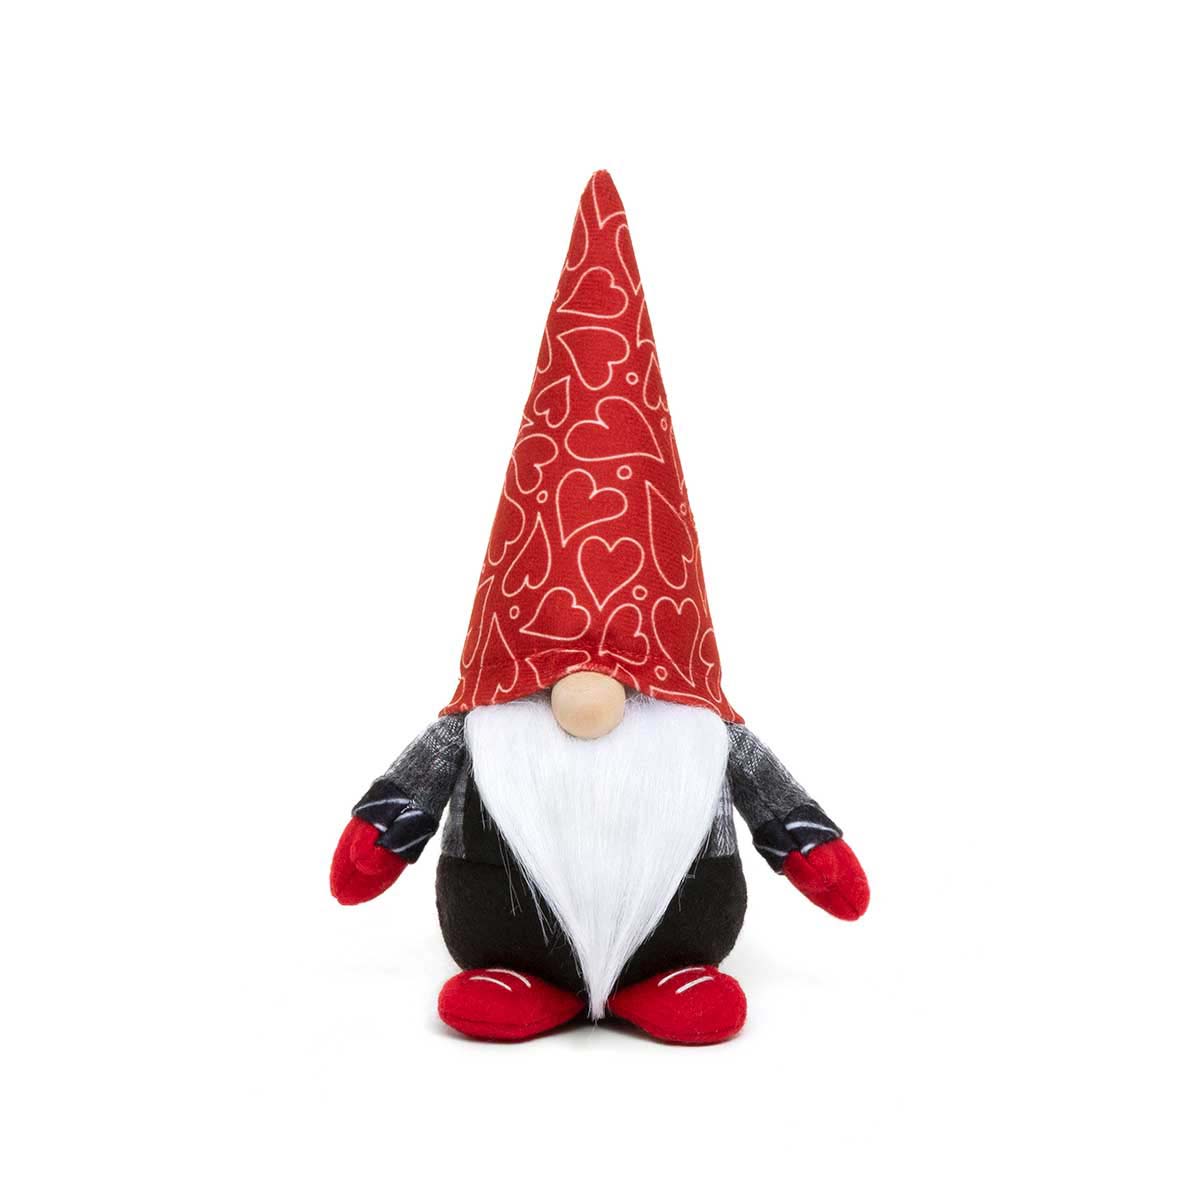 ROMEO GNOME WITH HEART HAT, WOOD NOSE, WHITE BEARD,